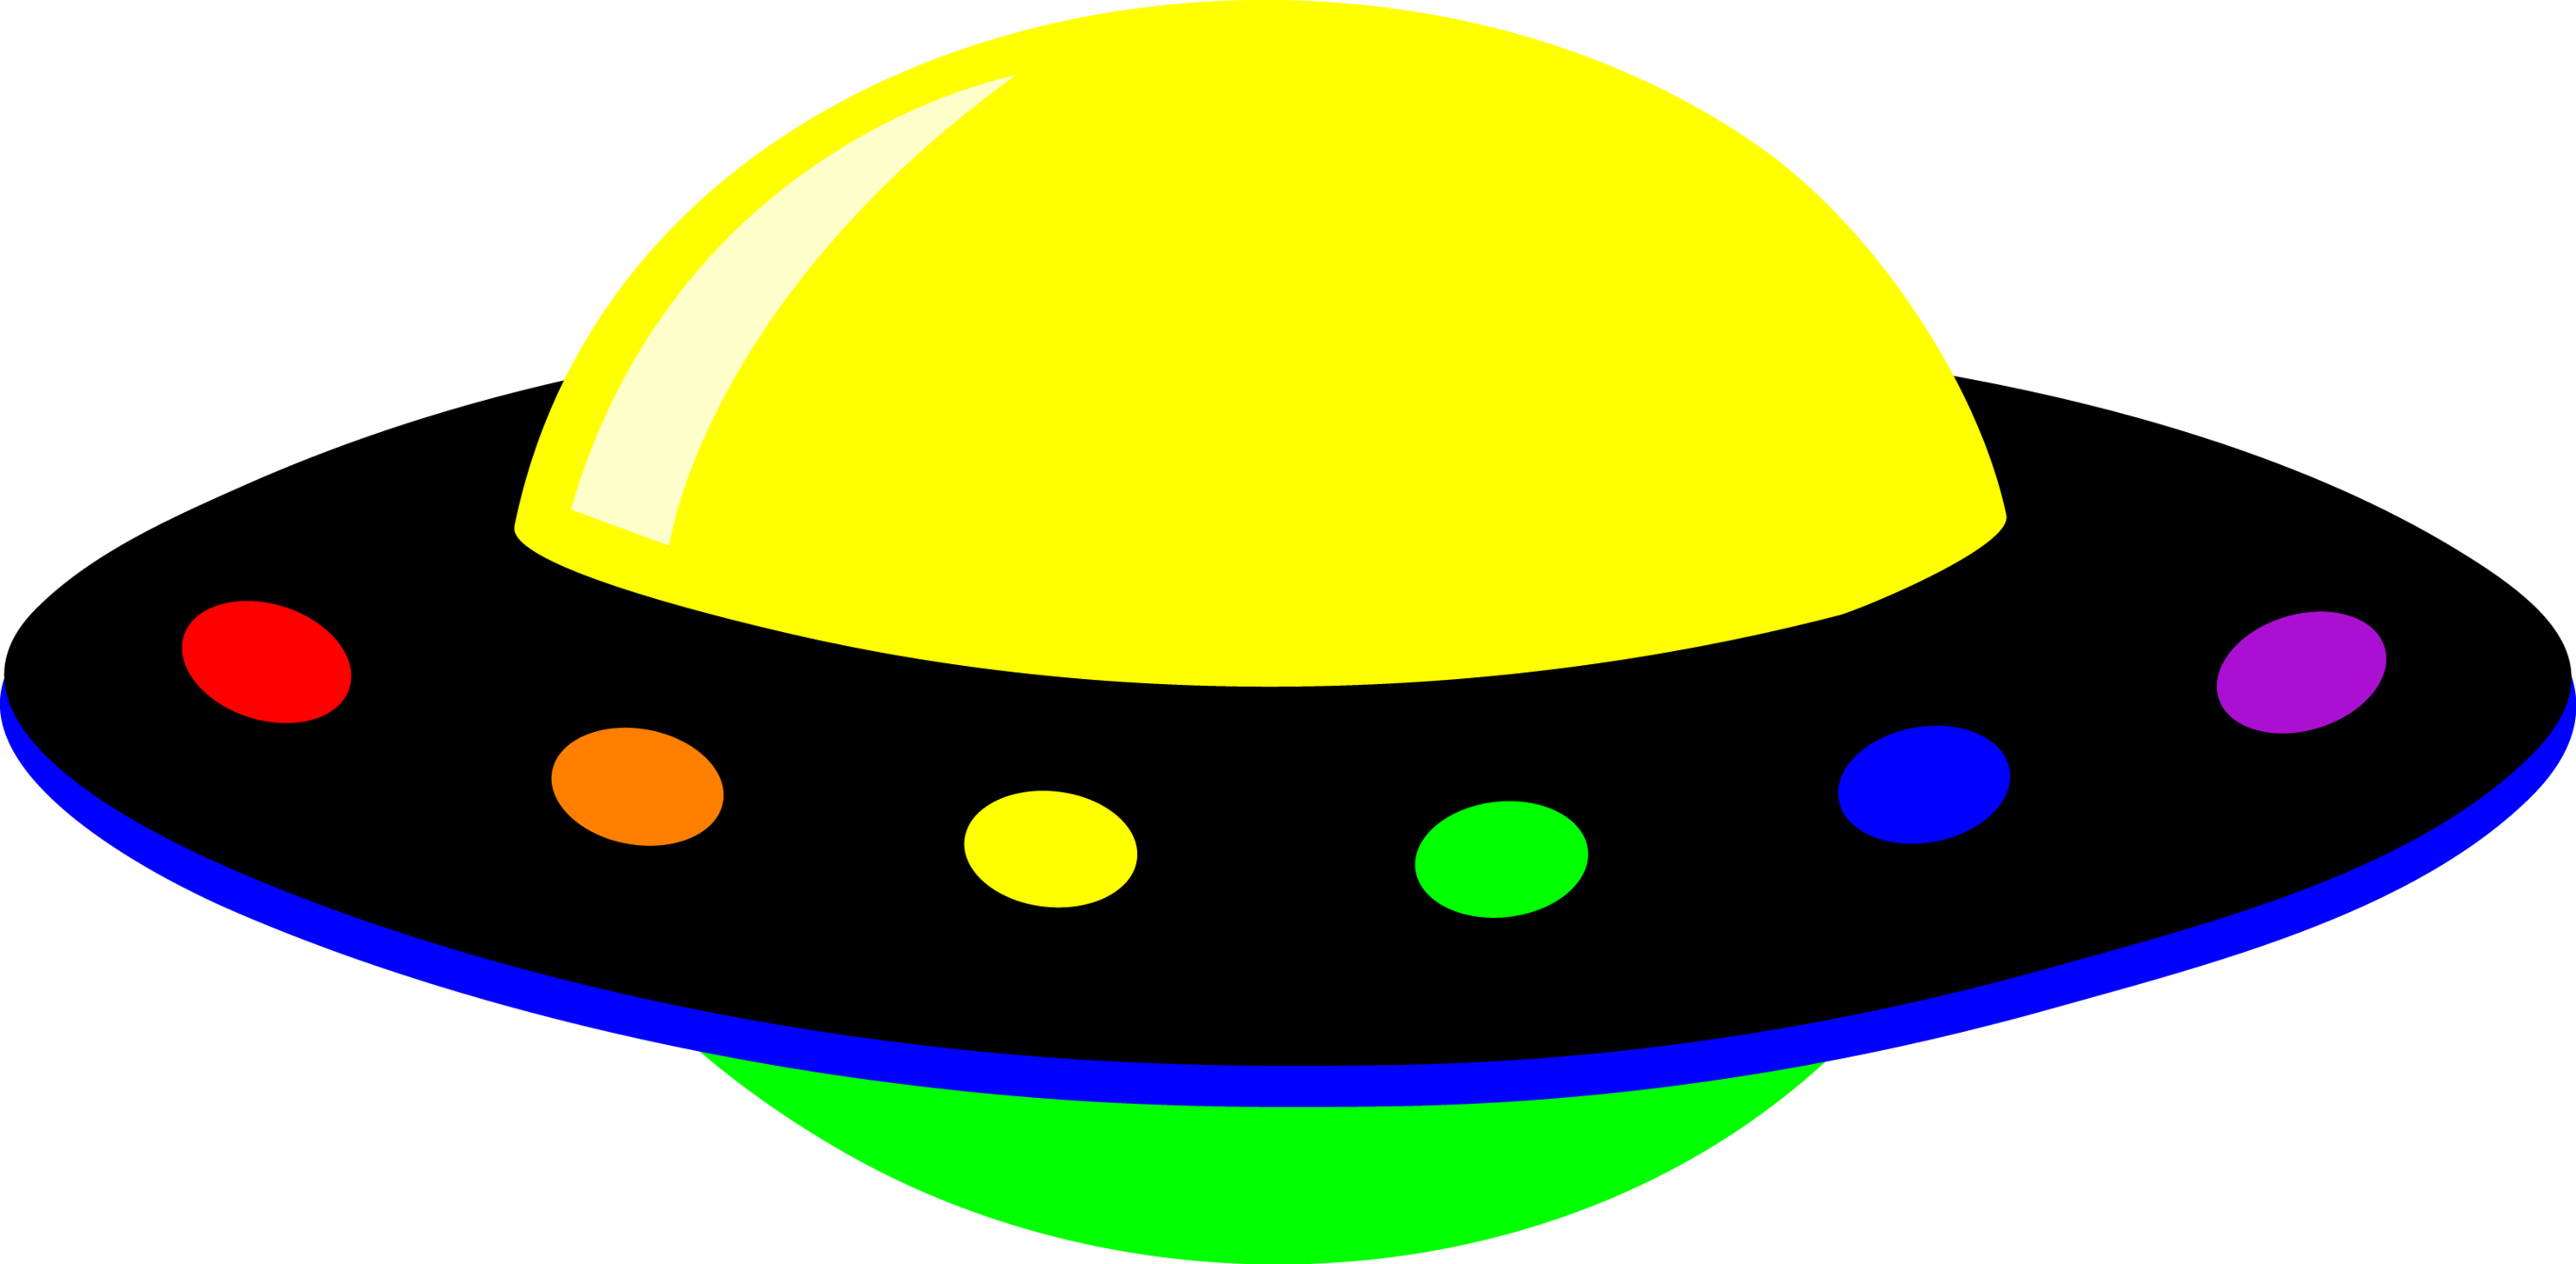 Ufo clipart starship. Roadway free download best